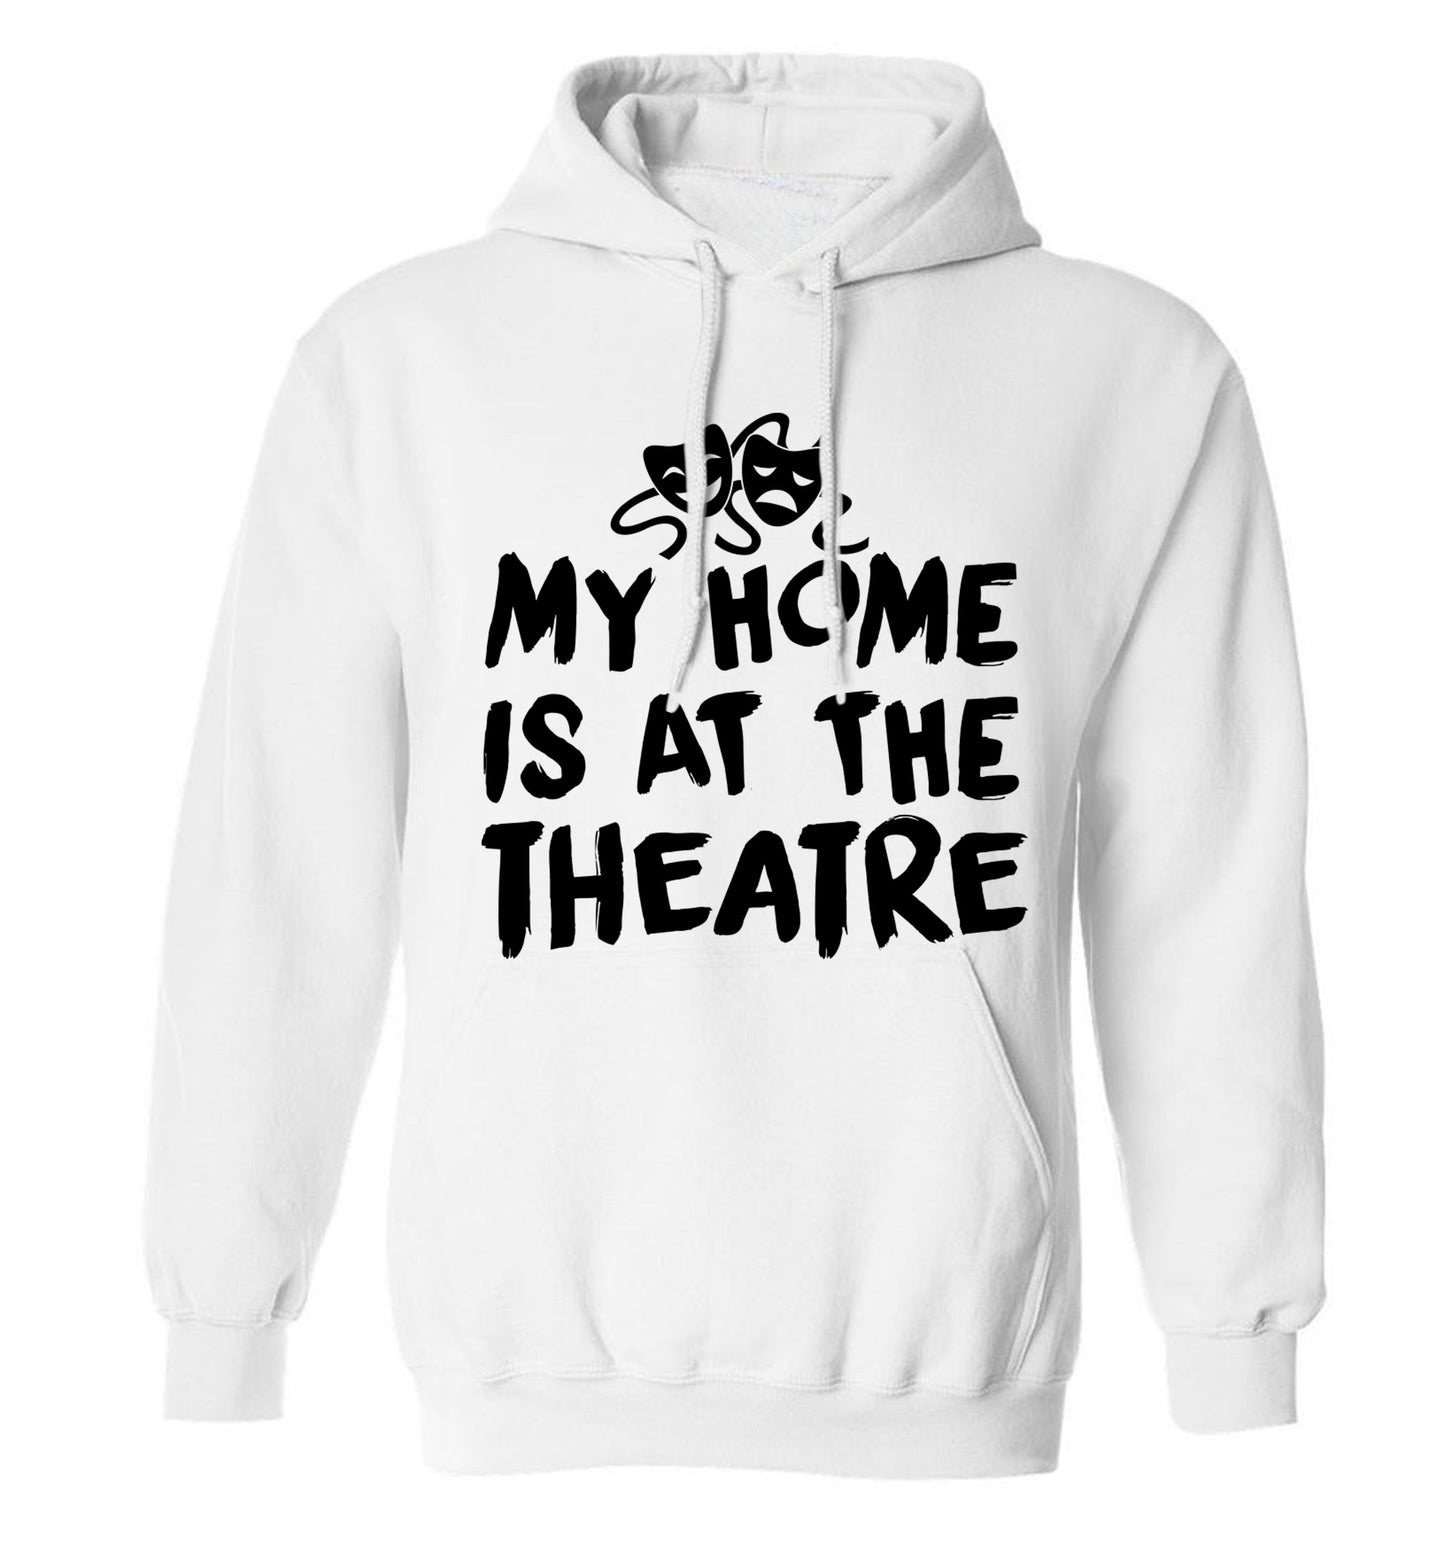 My home is at the theatre adults unisex white hoodie 2XL